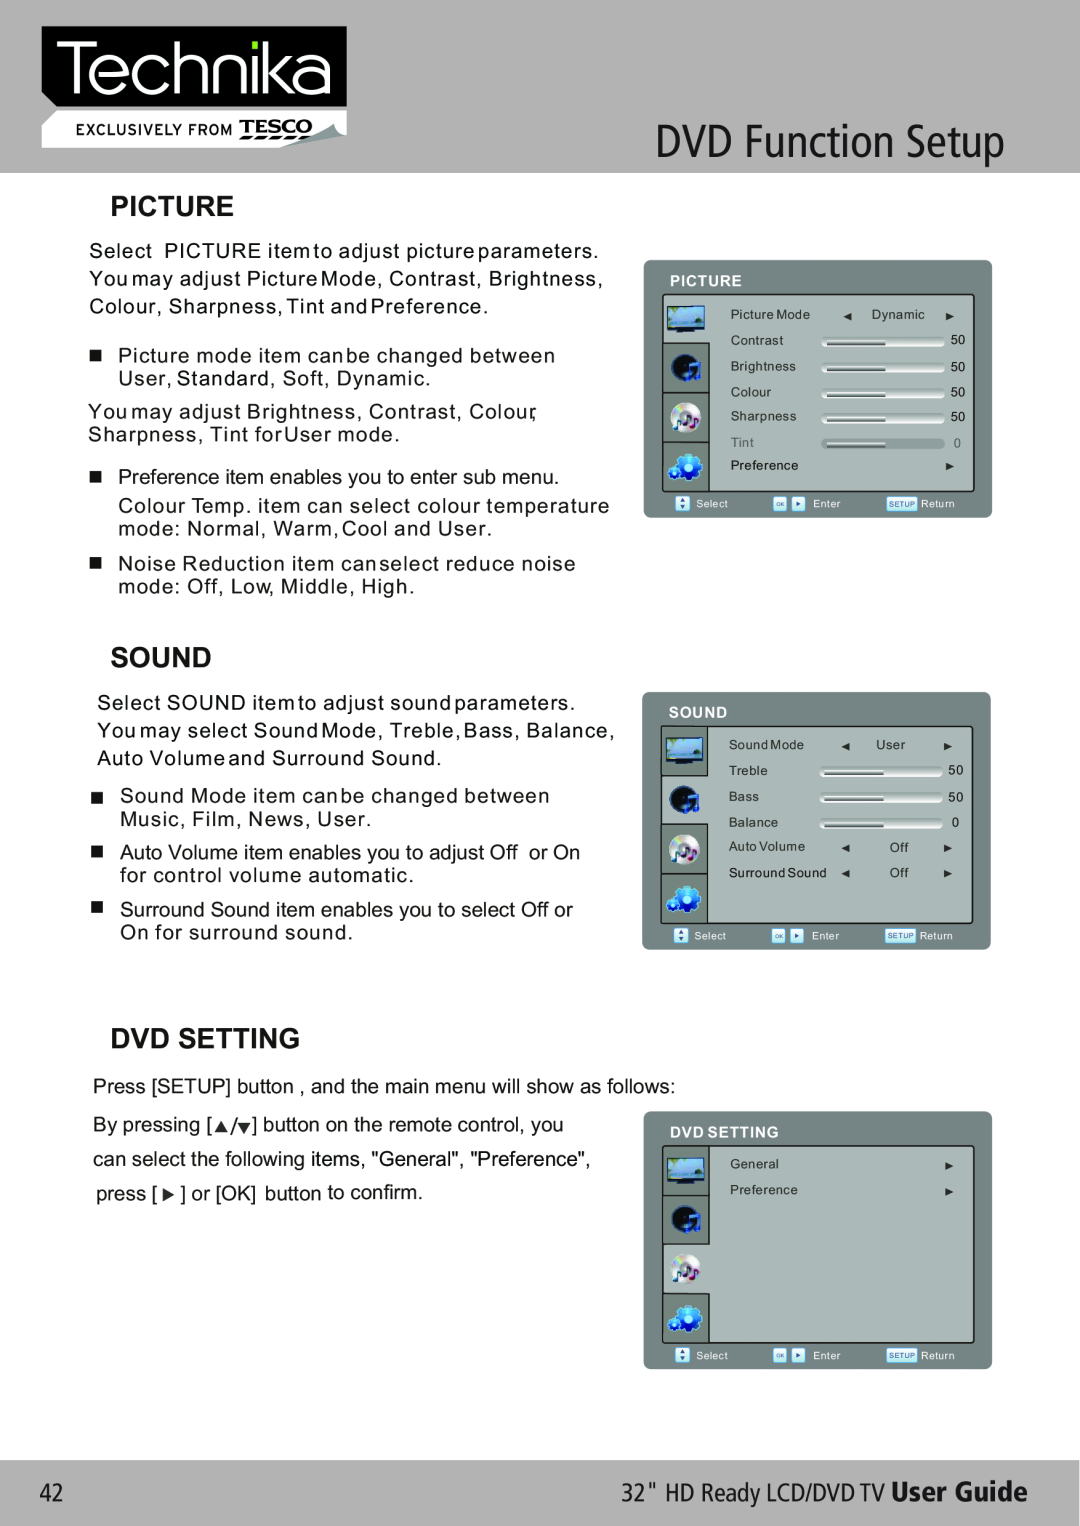 Technika 32-612 manual DVD Function Setup, Picture, Sound, Dvd Setting, HD Ready LCD/DVD TV User Guide 